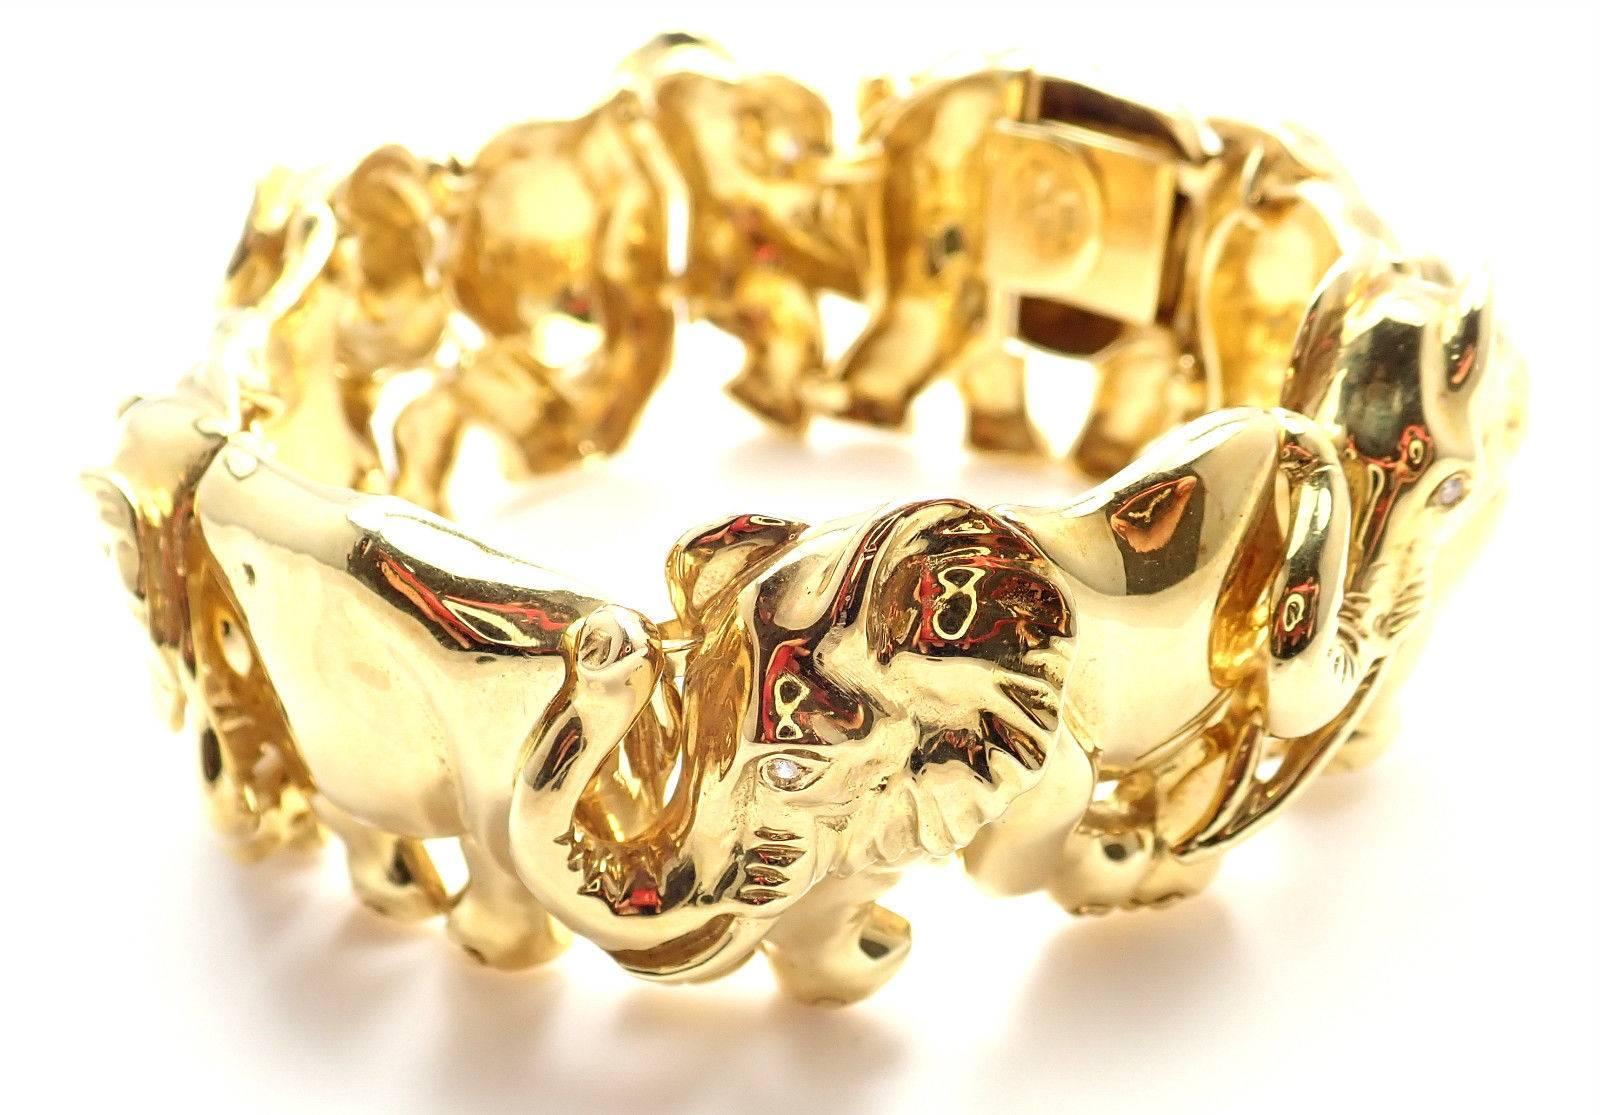 wide gold bangles